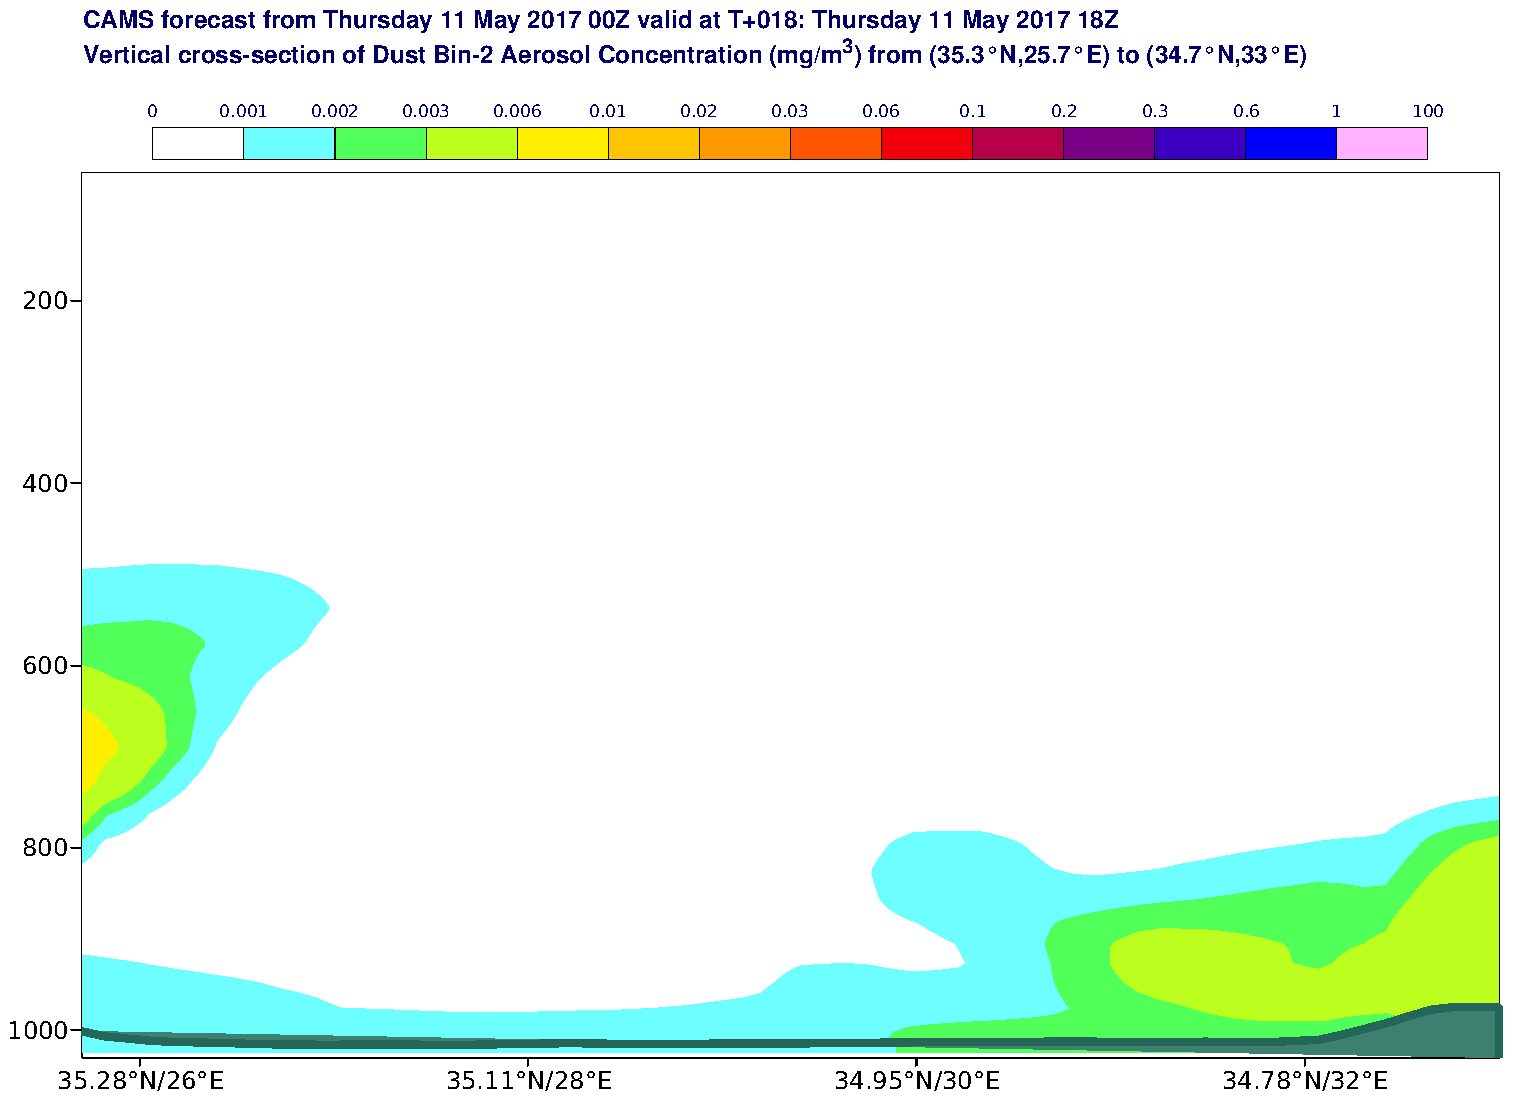 Vertical cross-section of Dust Bin-2 Aerosol Concentration (mg/m3) valid at T18 - 2017-05-11 18:00